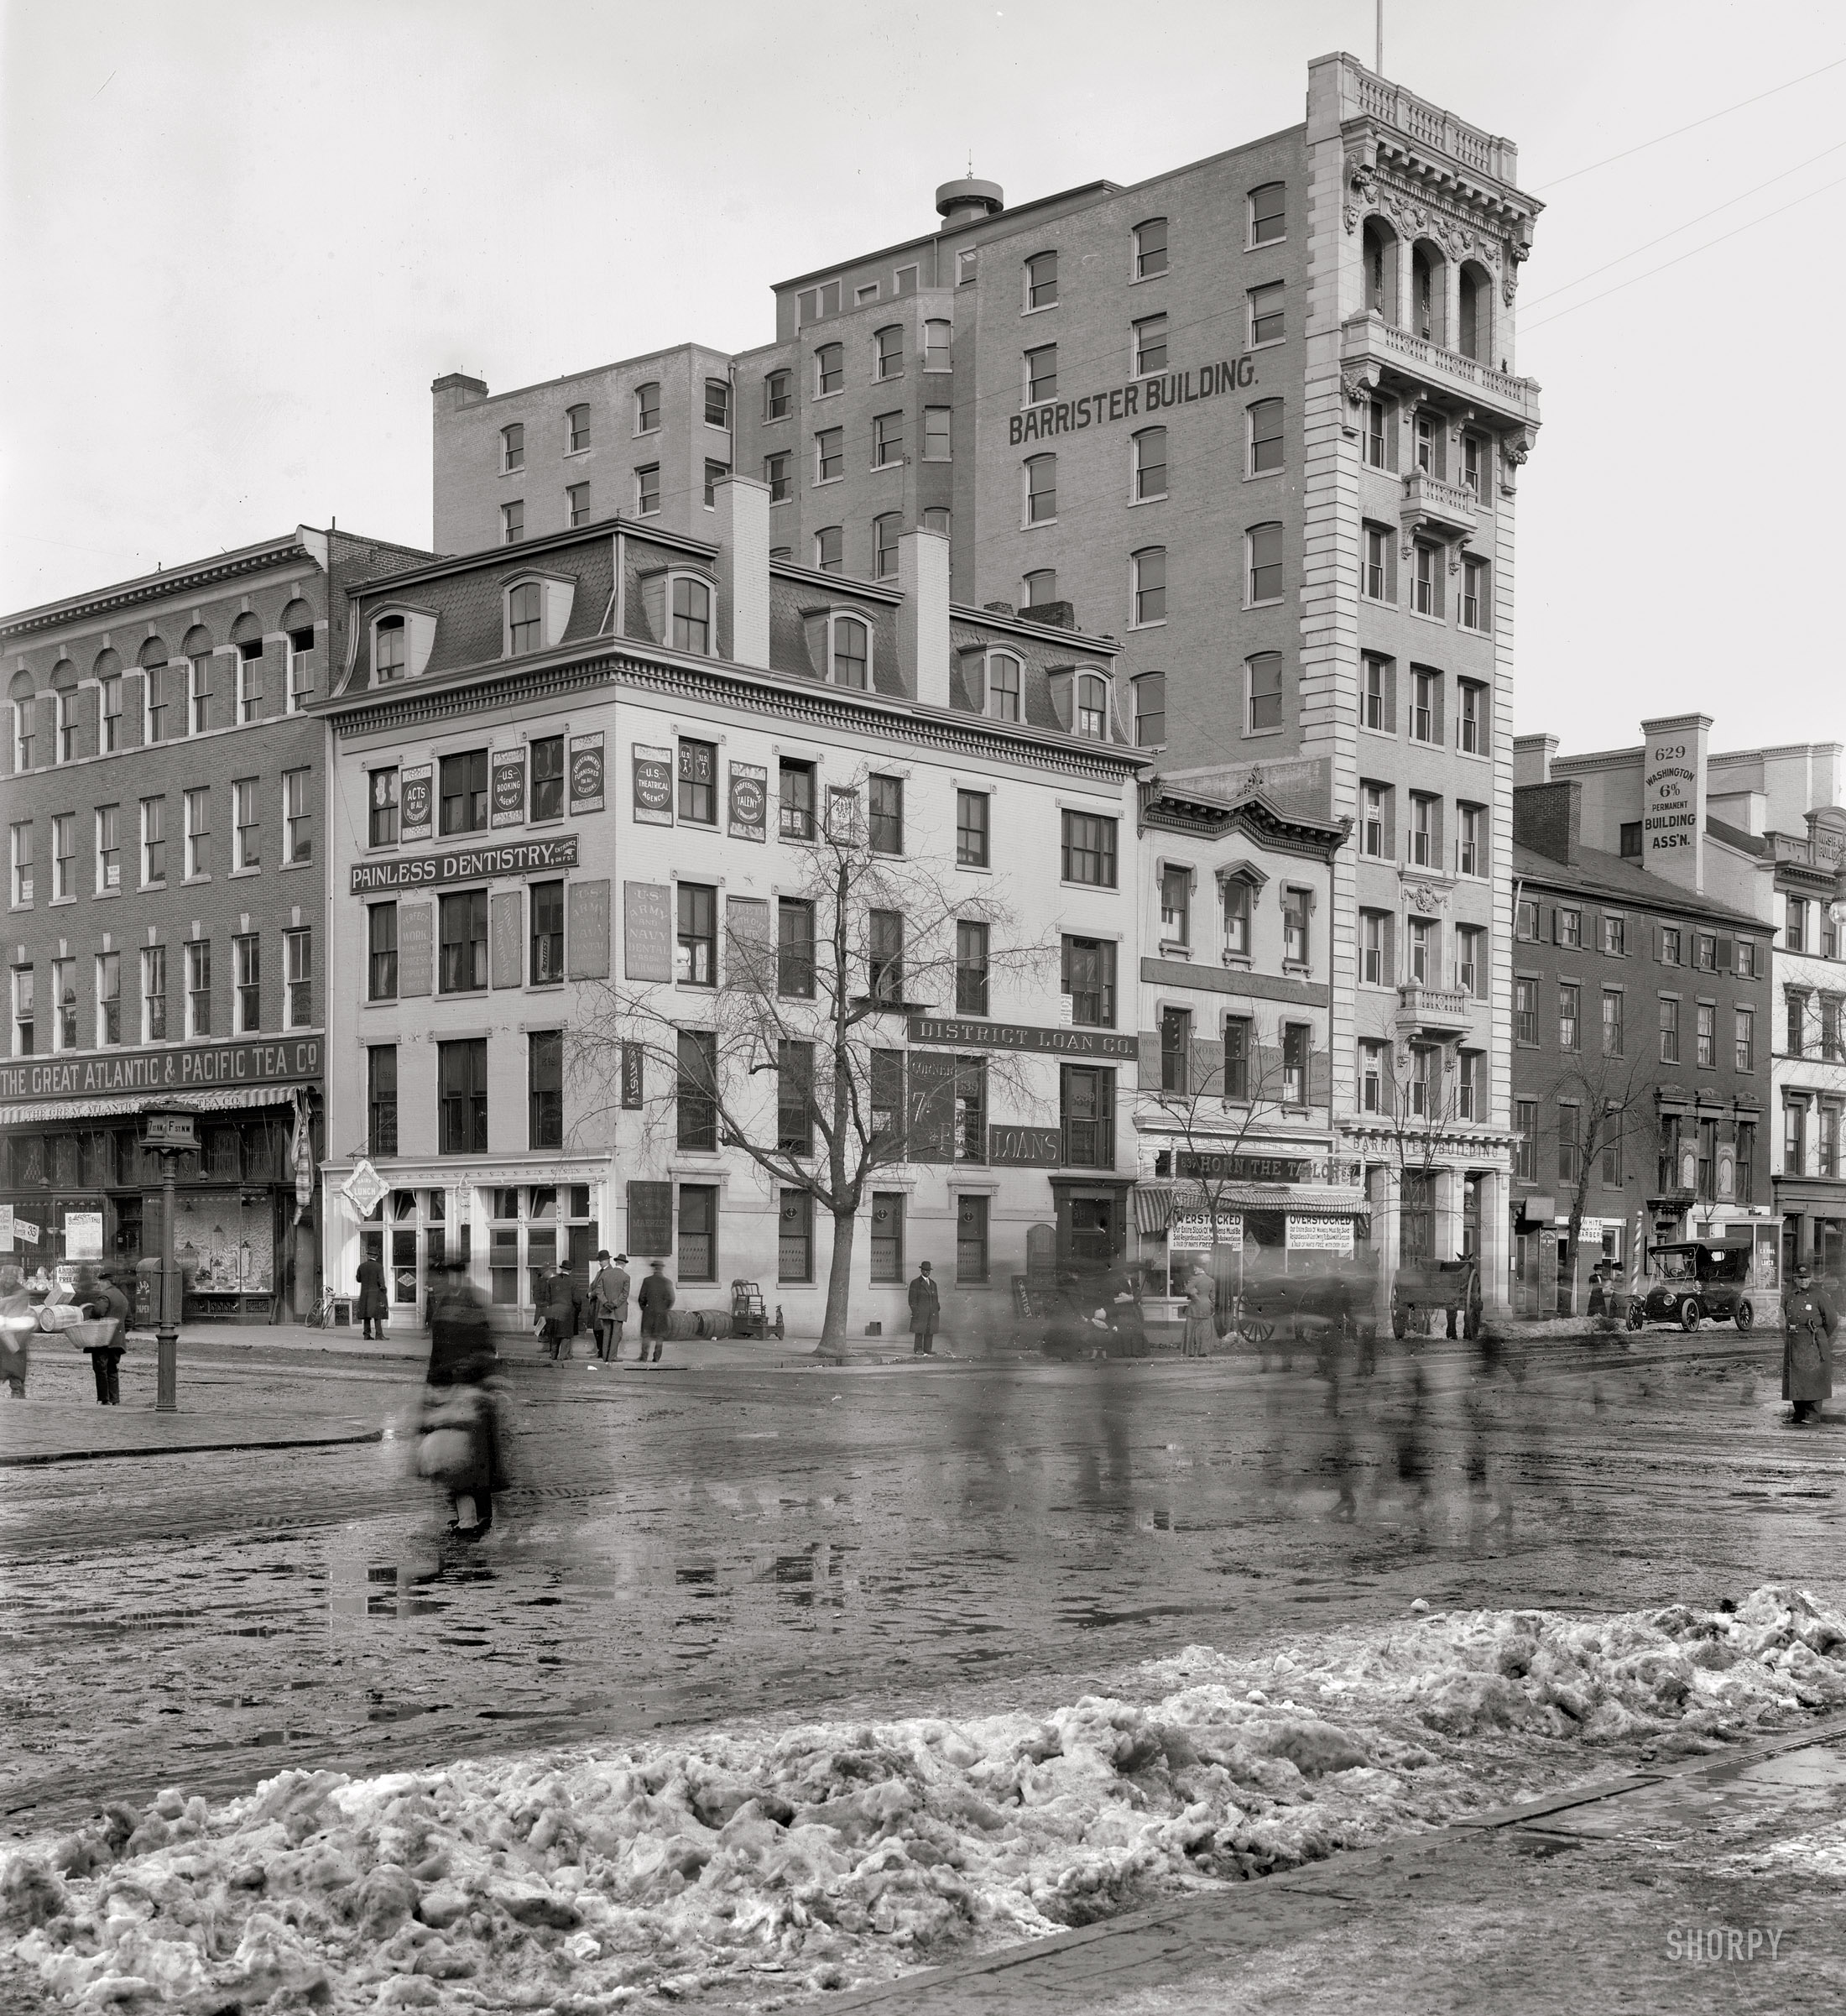 Washington, D.C., in a circa 1916 time exposure. "Corner of 7th and F northwest." National Photo Company Collection glass negative, 8x10 inches. View full size.